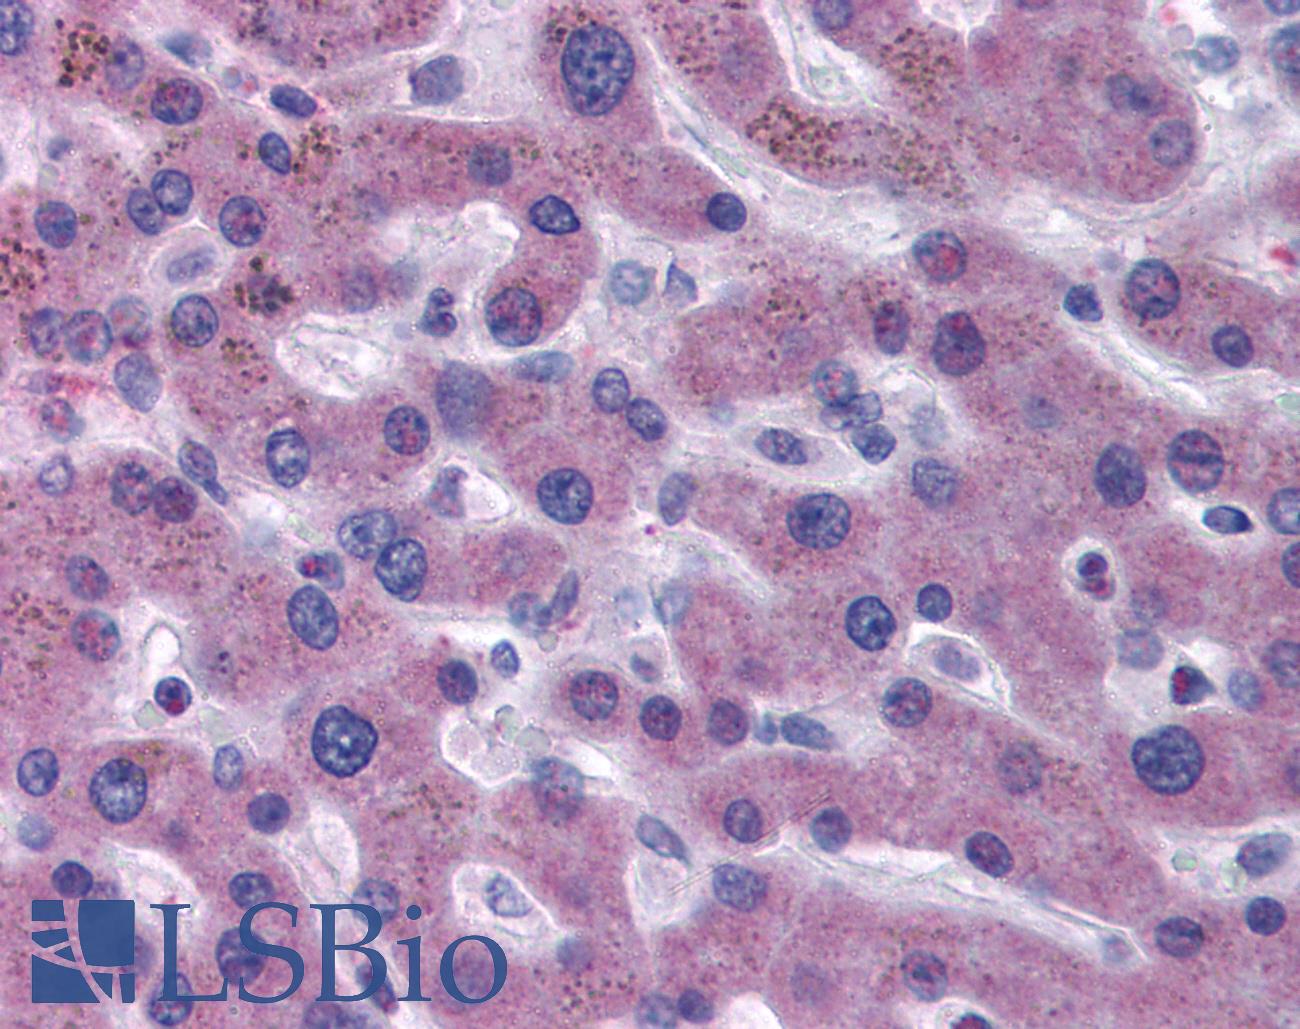 F7 / Factor VII Antibody - Anti-F7 / Factor VII antibody IHC of human liver. Immunohistochemistry of formalin-fixed, paraffin-embedded tissue after heat-induced antigen retrieval. Antibody concentration 5 ug/ml.